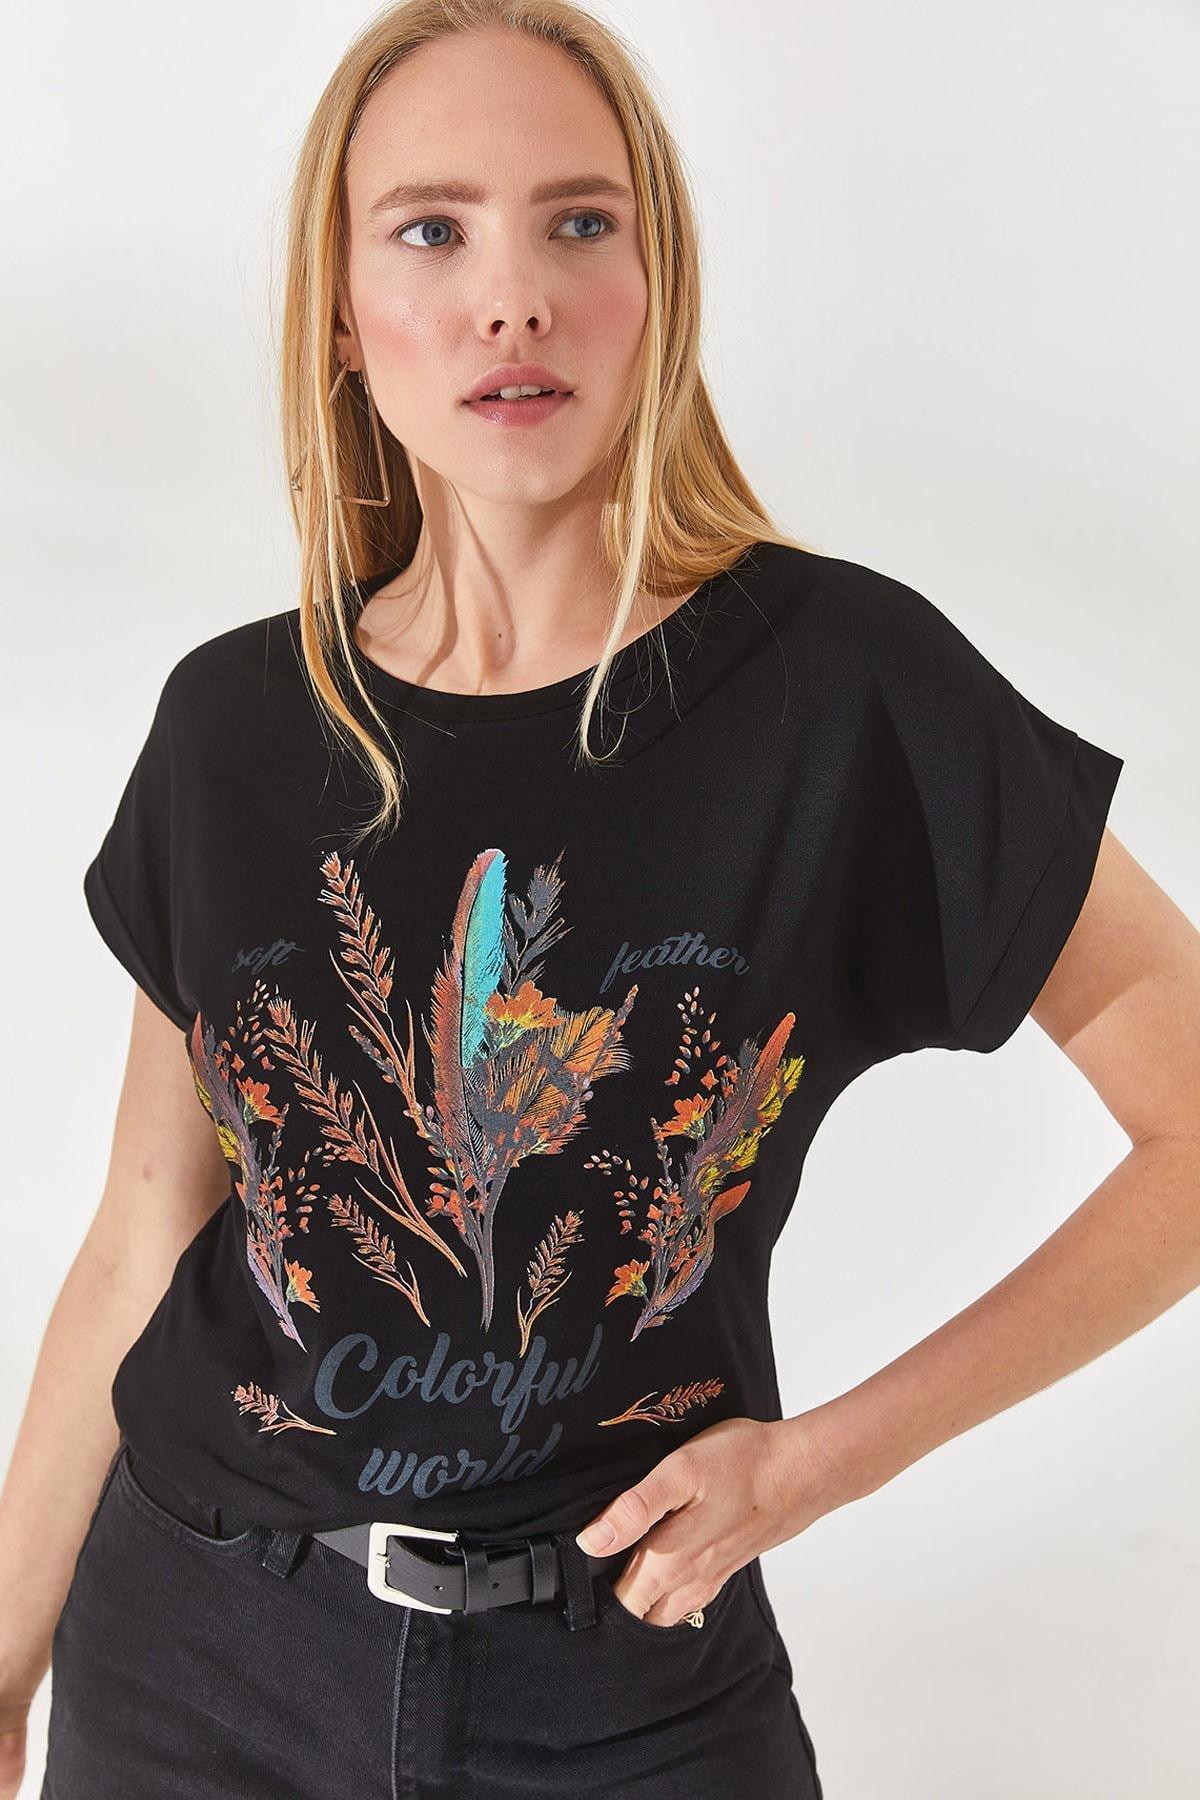 Olalook - Black Feathered Printed T-Shirt